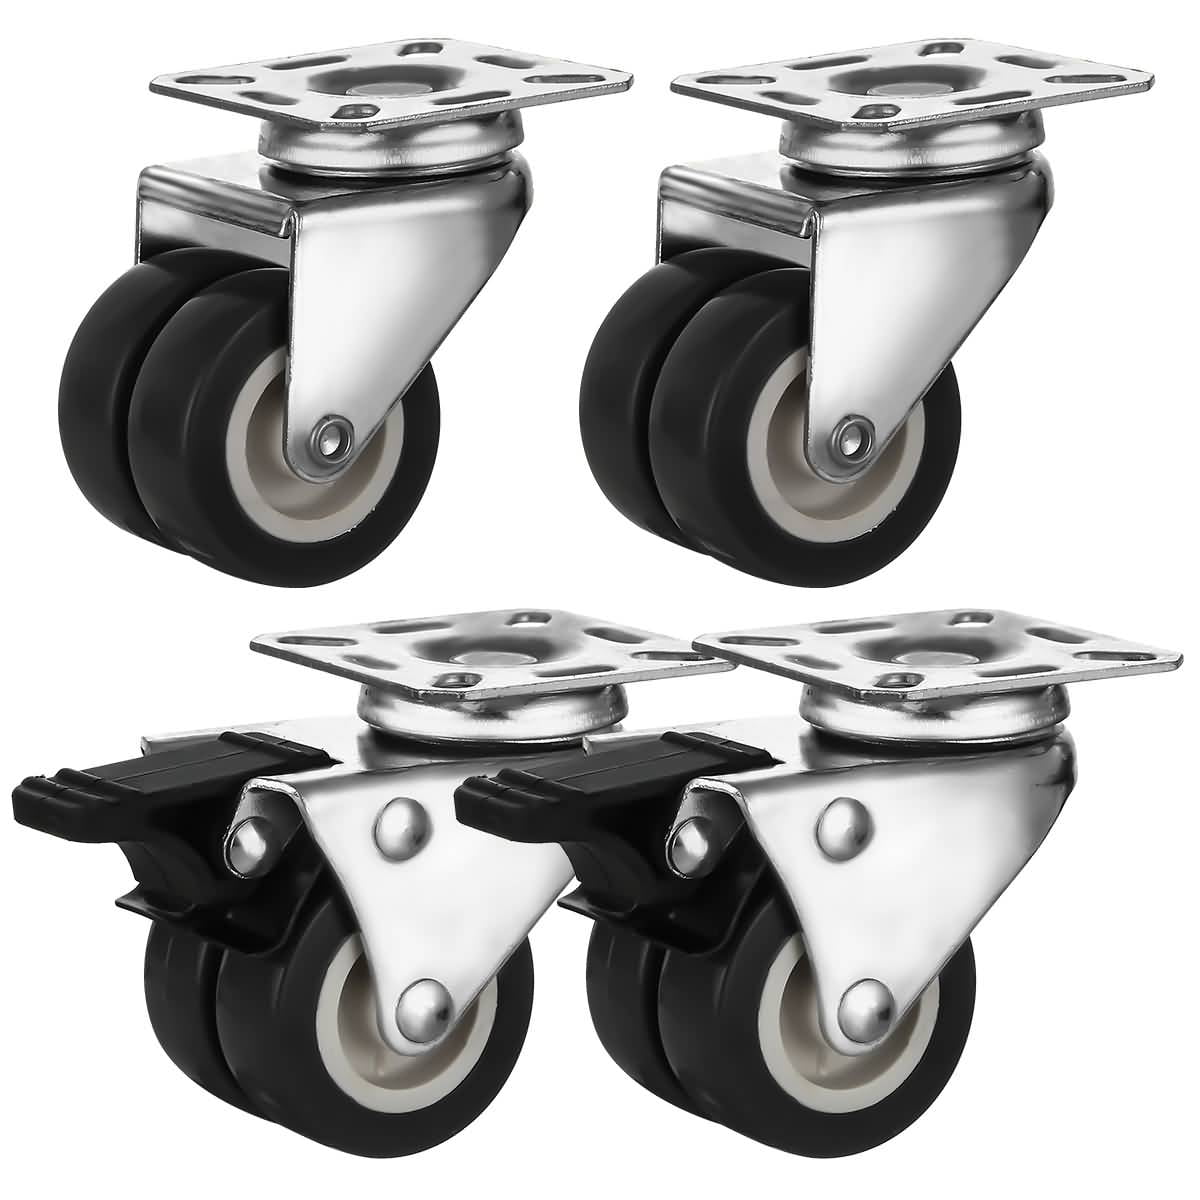 Lot of 10 Twin Wheel Casters Swiveling Top Plate with Brake 2-Inch 